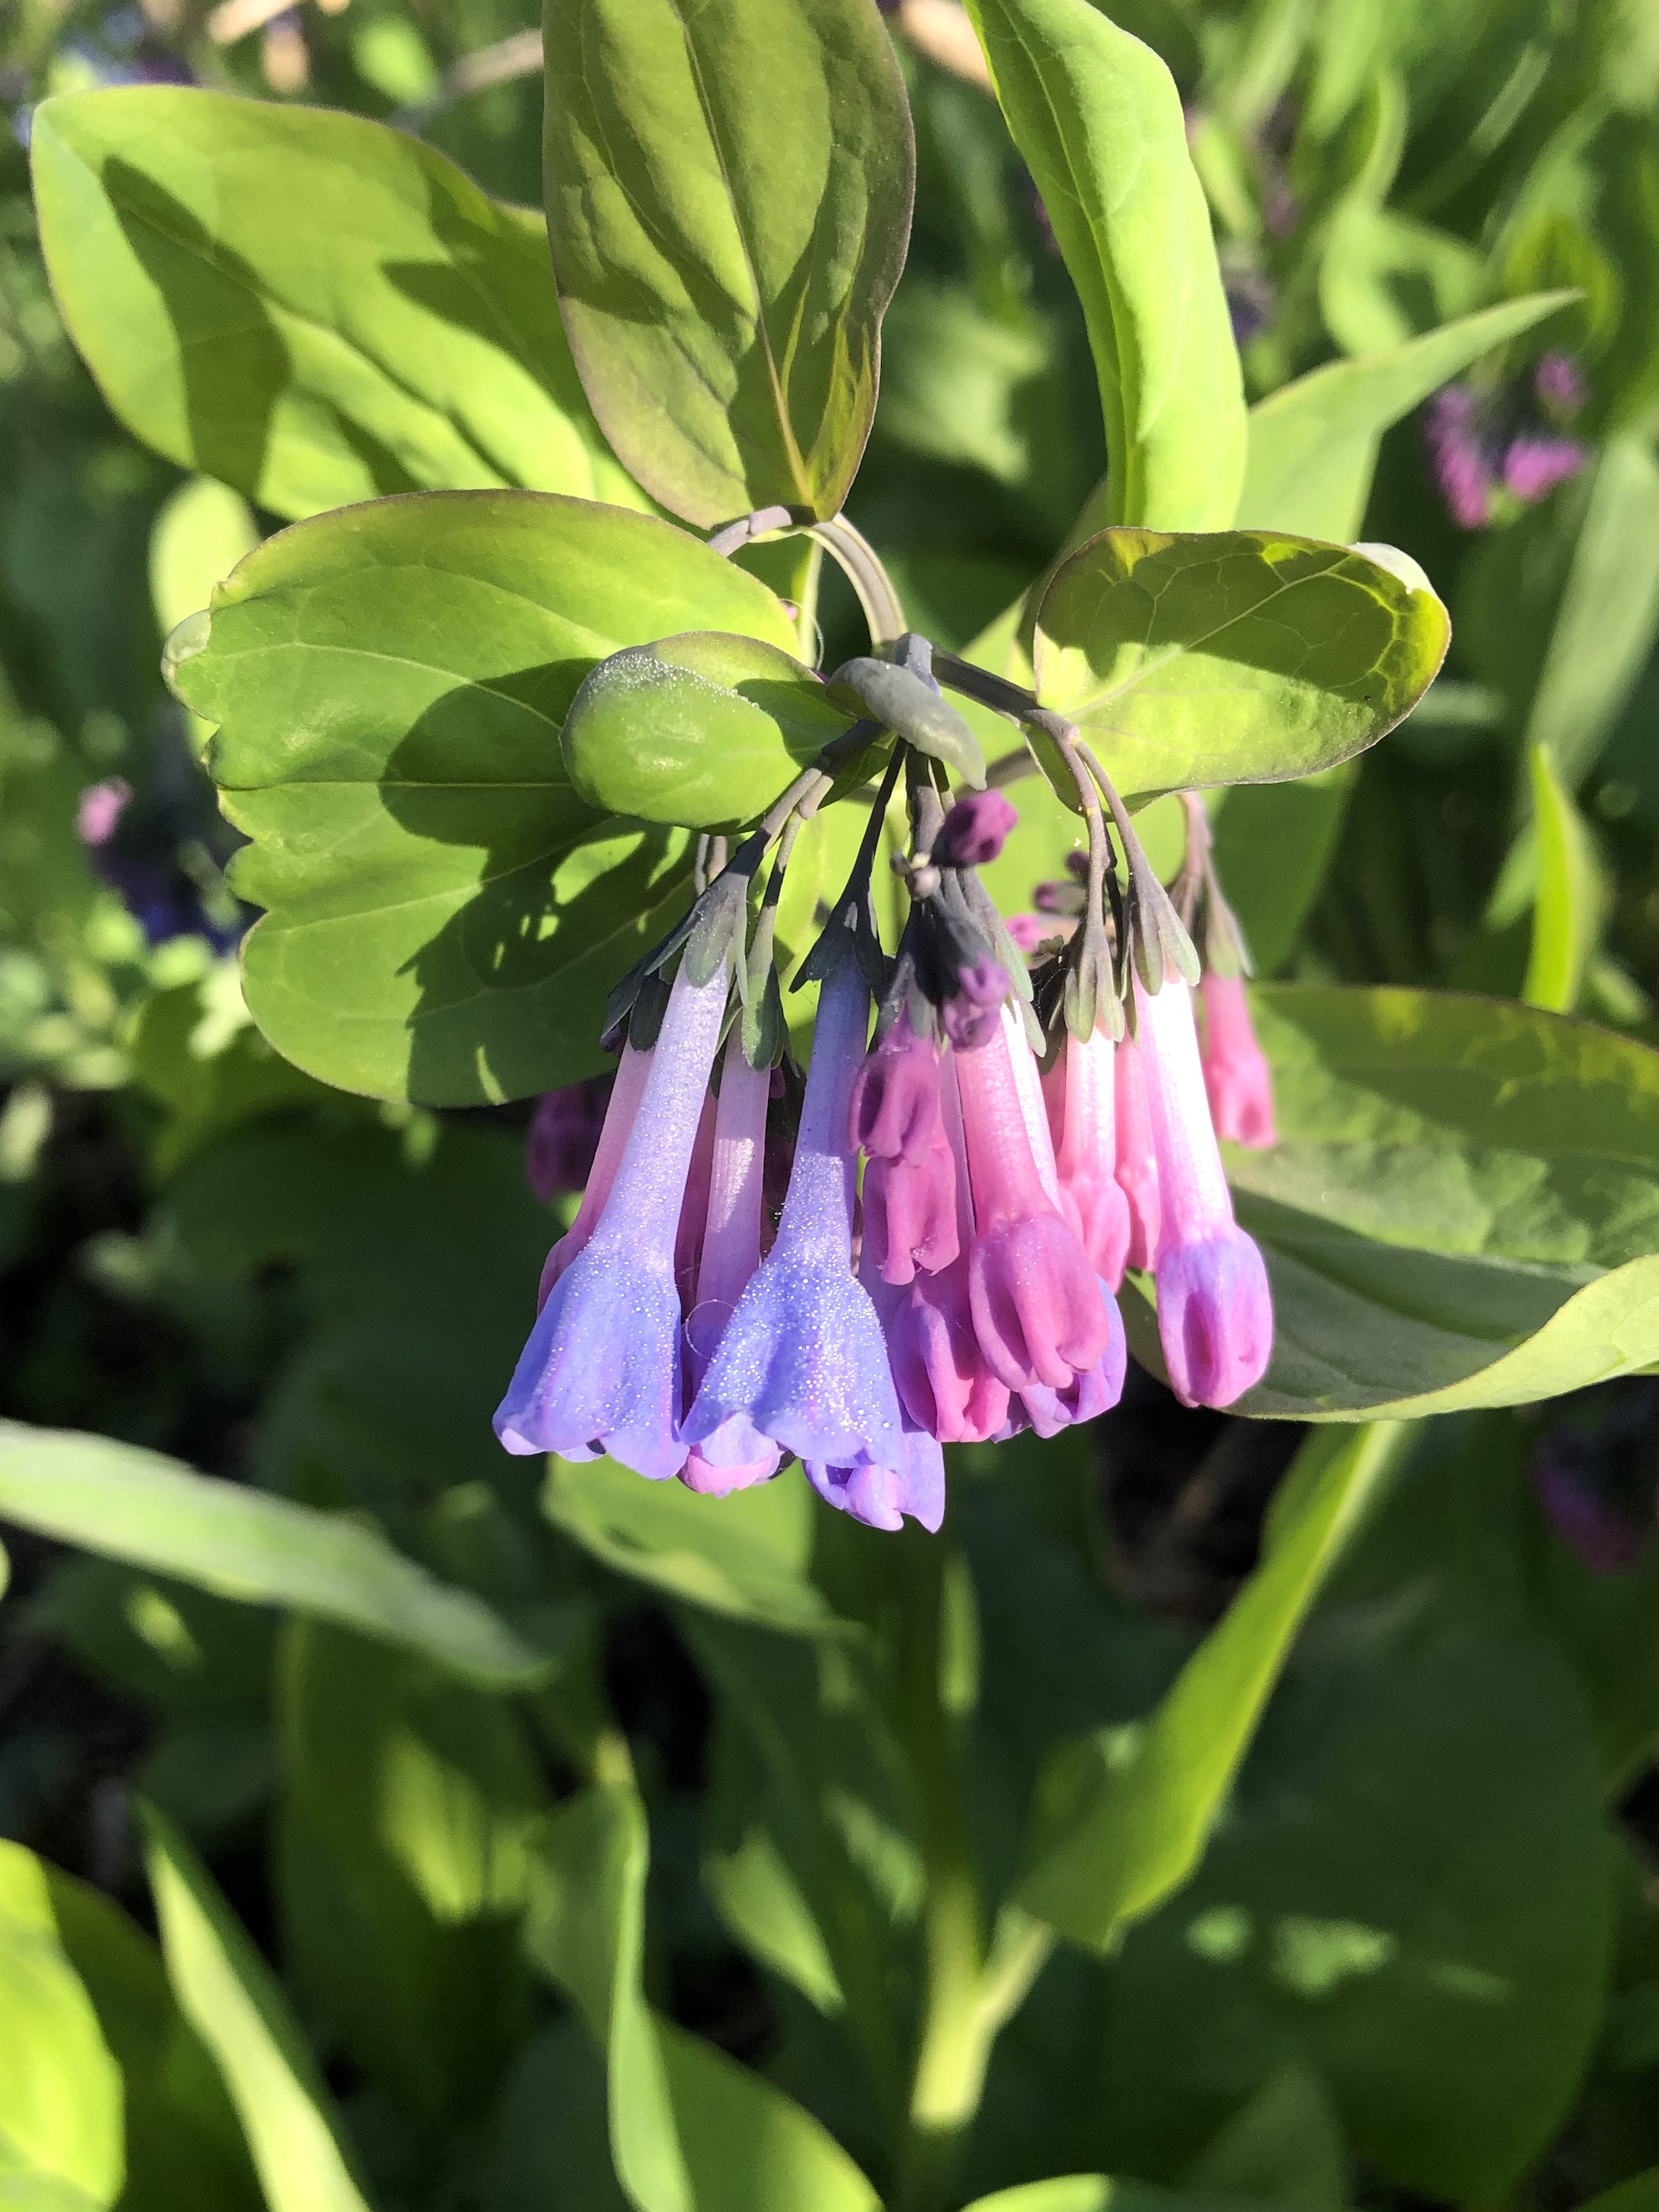 Virginia Bluebells by Duck Ponda in Madison, Wisconsin on April 16, 2021.